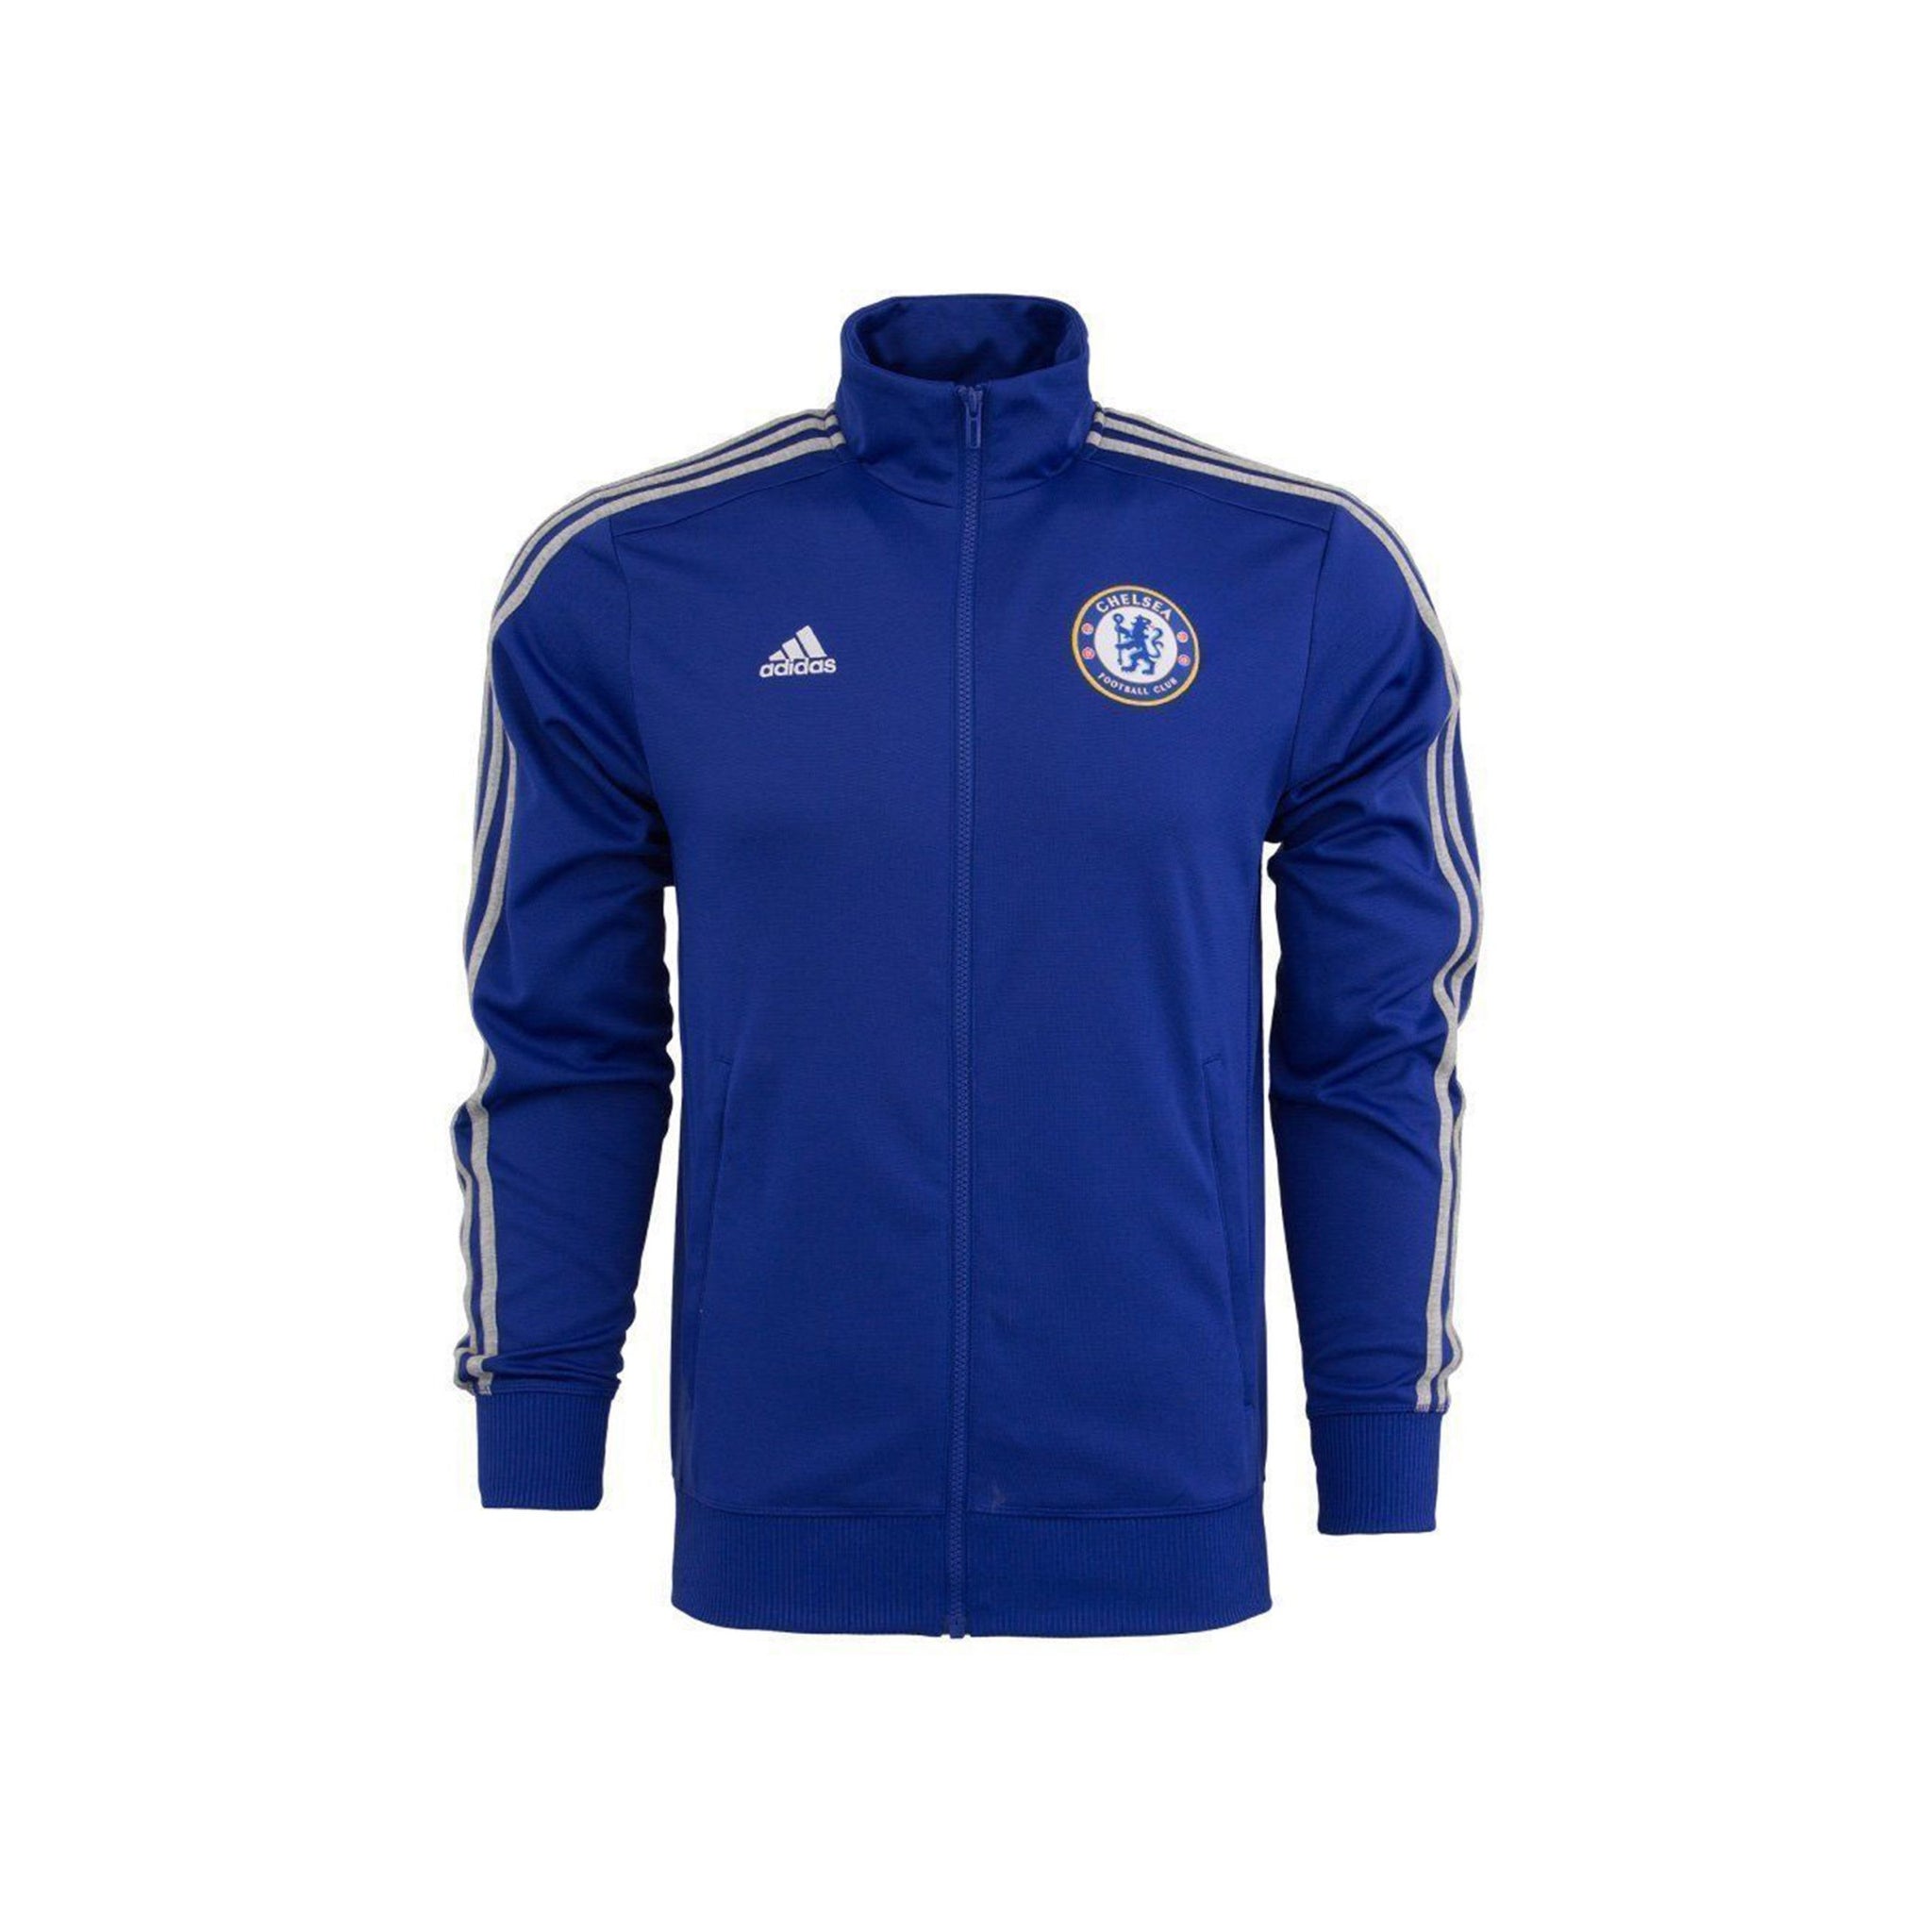 ADIDAS Chelsea FC Track Top 15/16